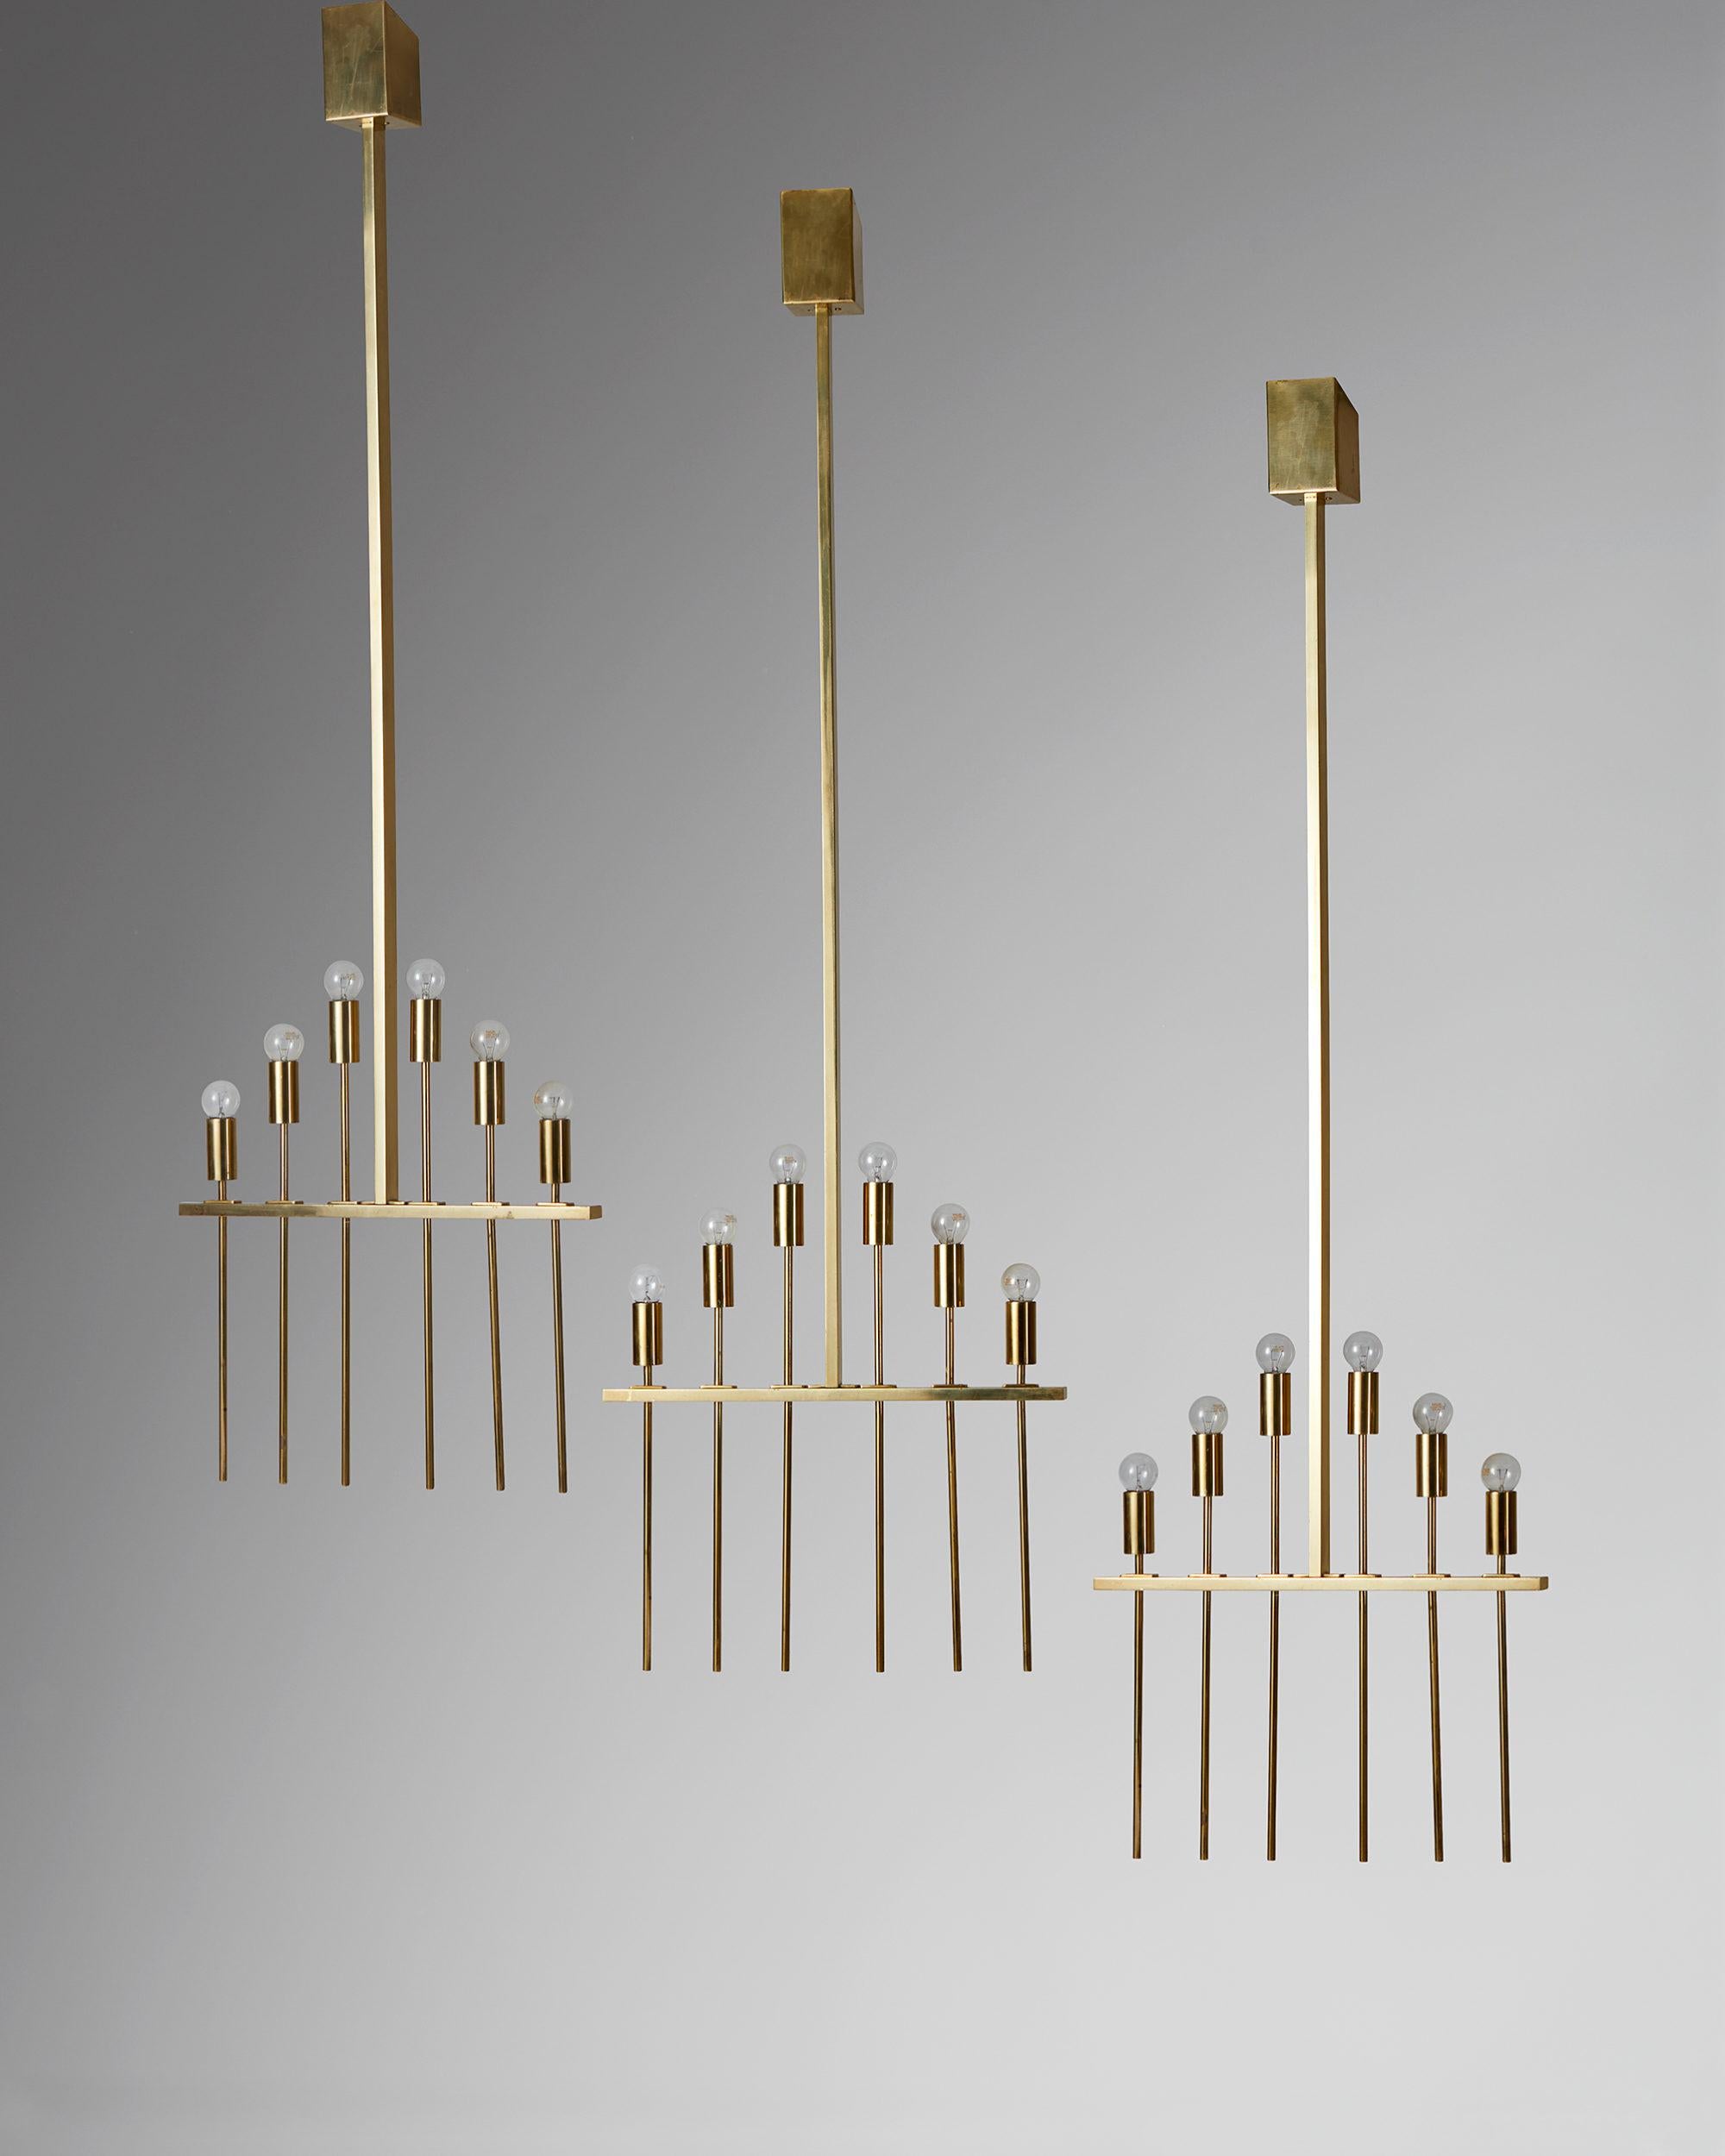 Set of three ceiling lamps/chandeliers, anonymous,
Finland. 1960´s.

Brass.

Dimensions:
H: 166 cm/ 5' 5 1/3